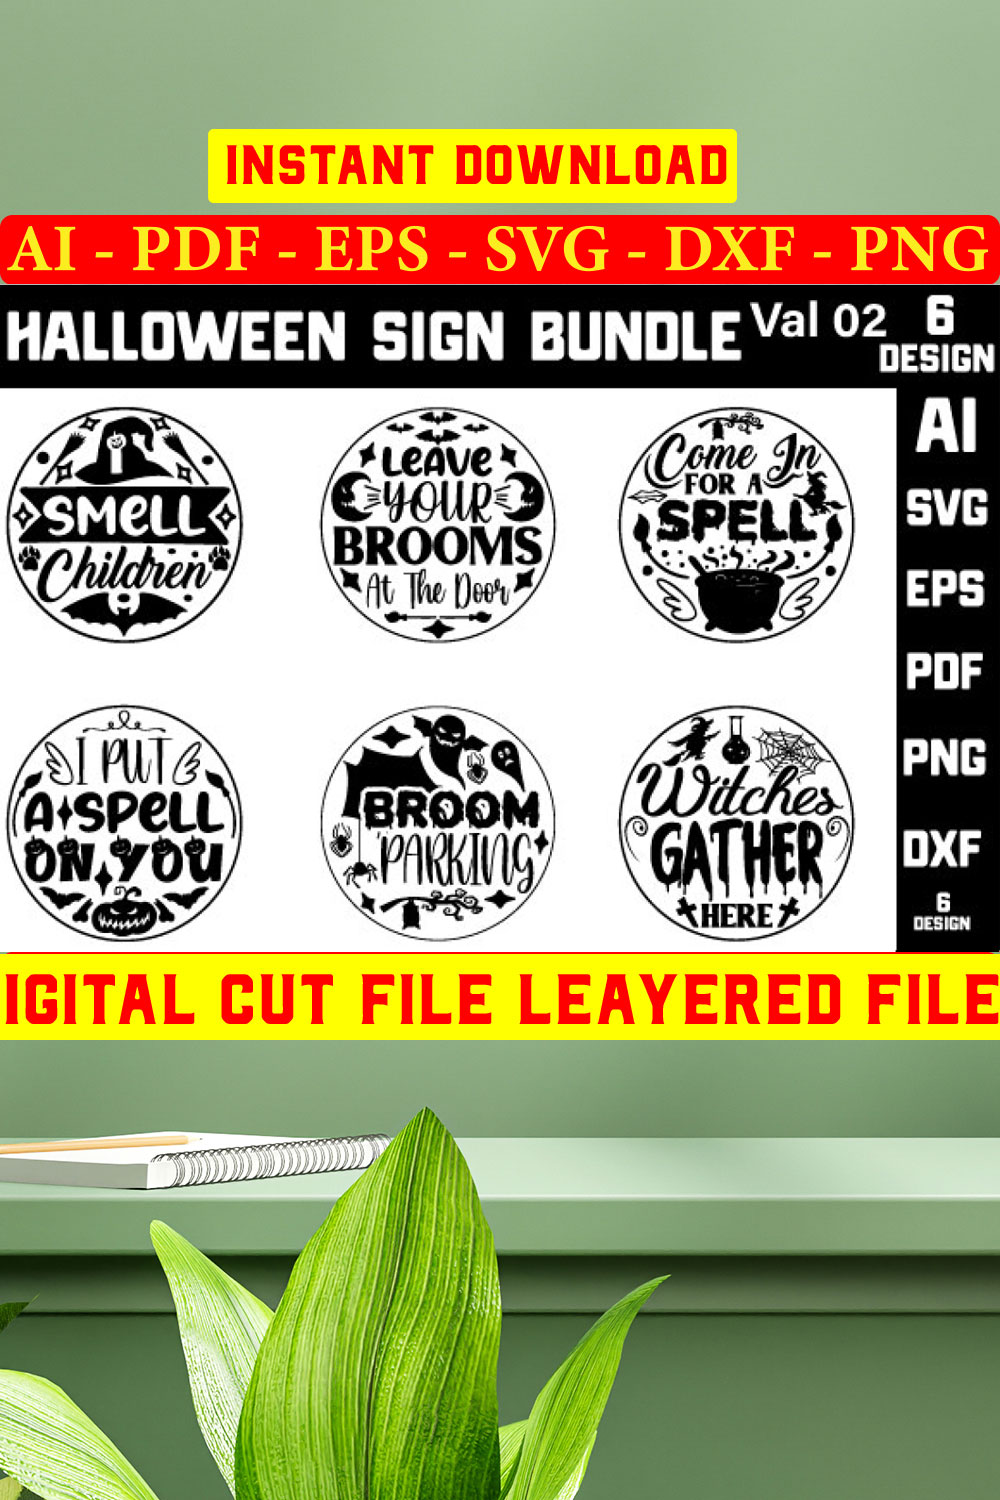 Halloween Sign Bundle Vol-2 Welcome to Halloween svg pinterest preview image.